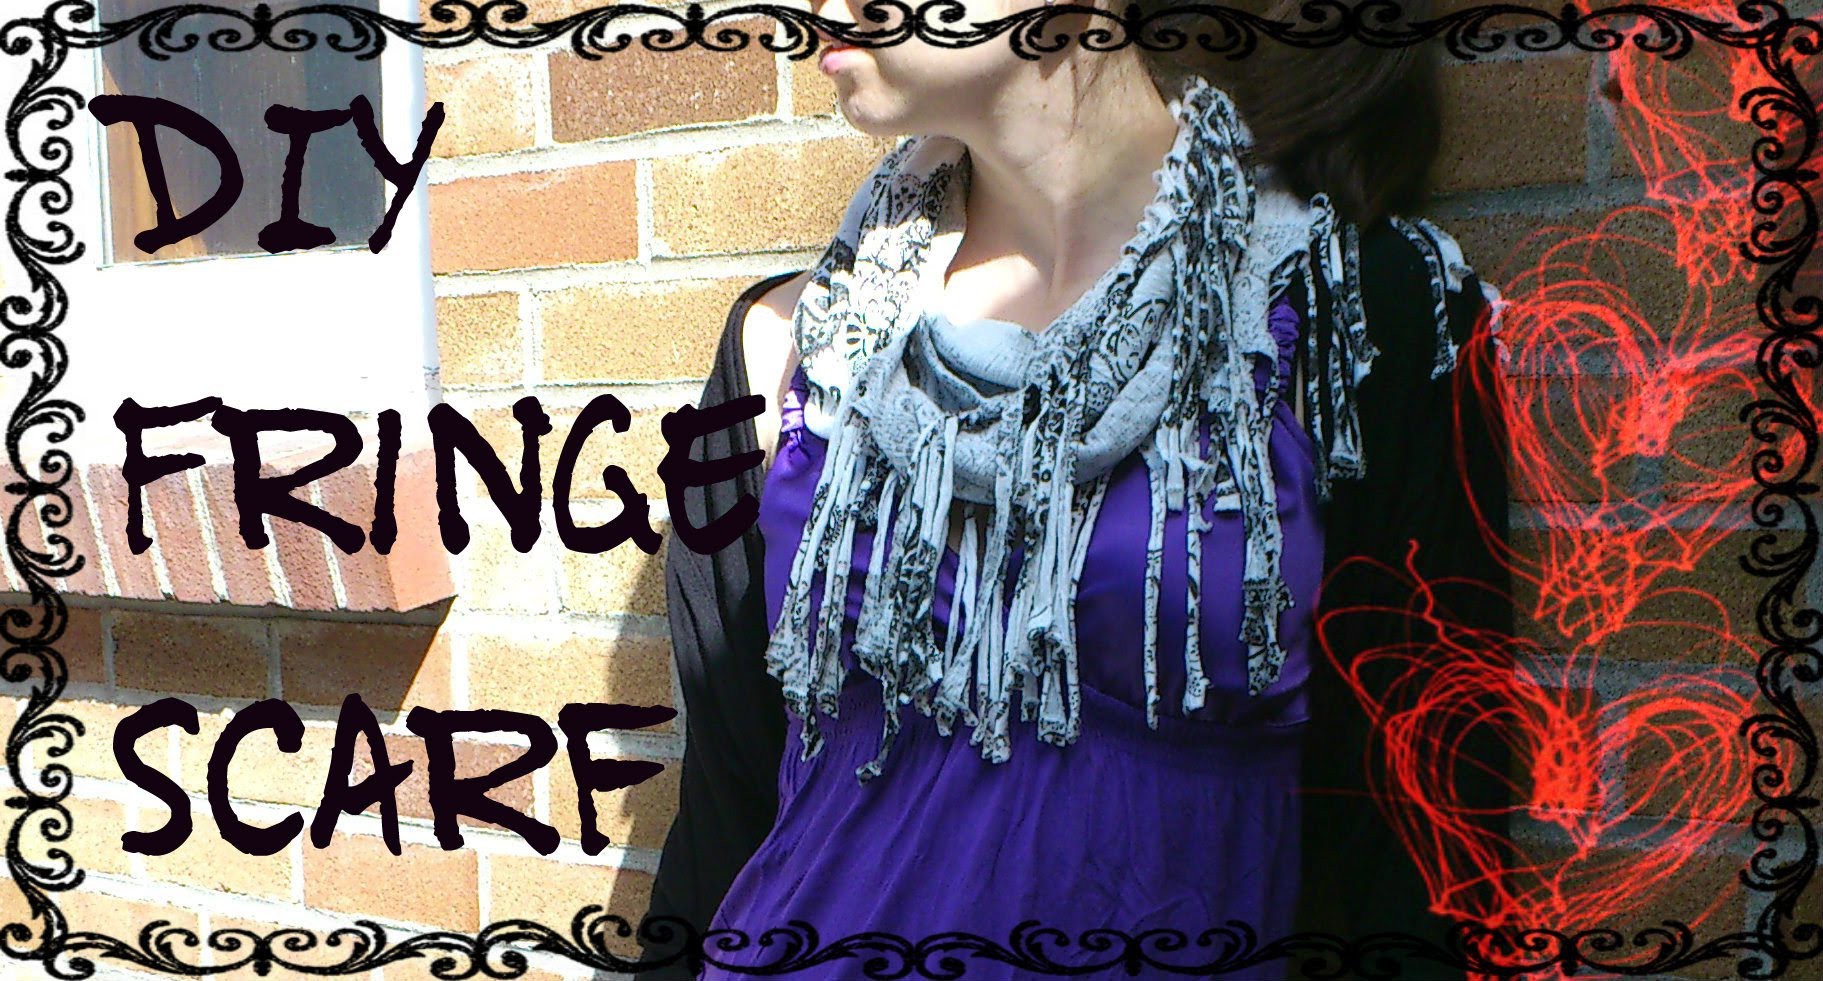 DIY Fringe Infinity Scarf (No Sewing!) | Make a Scarf from an Old Top or T-Shirt